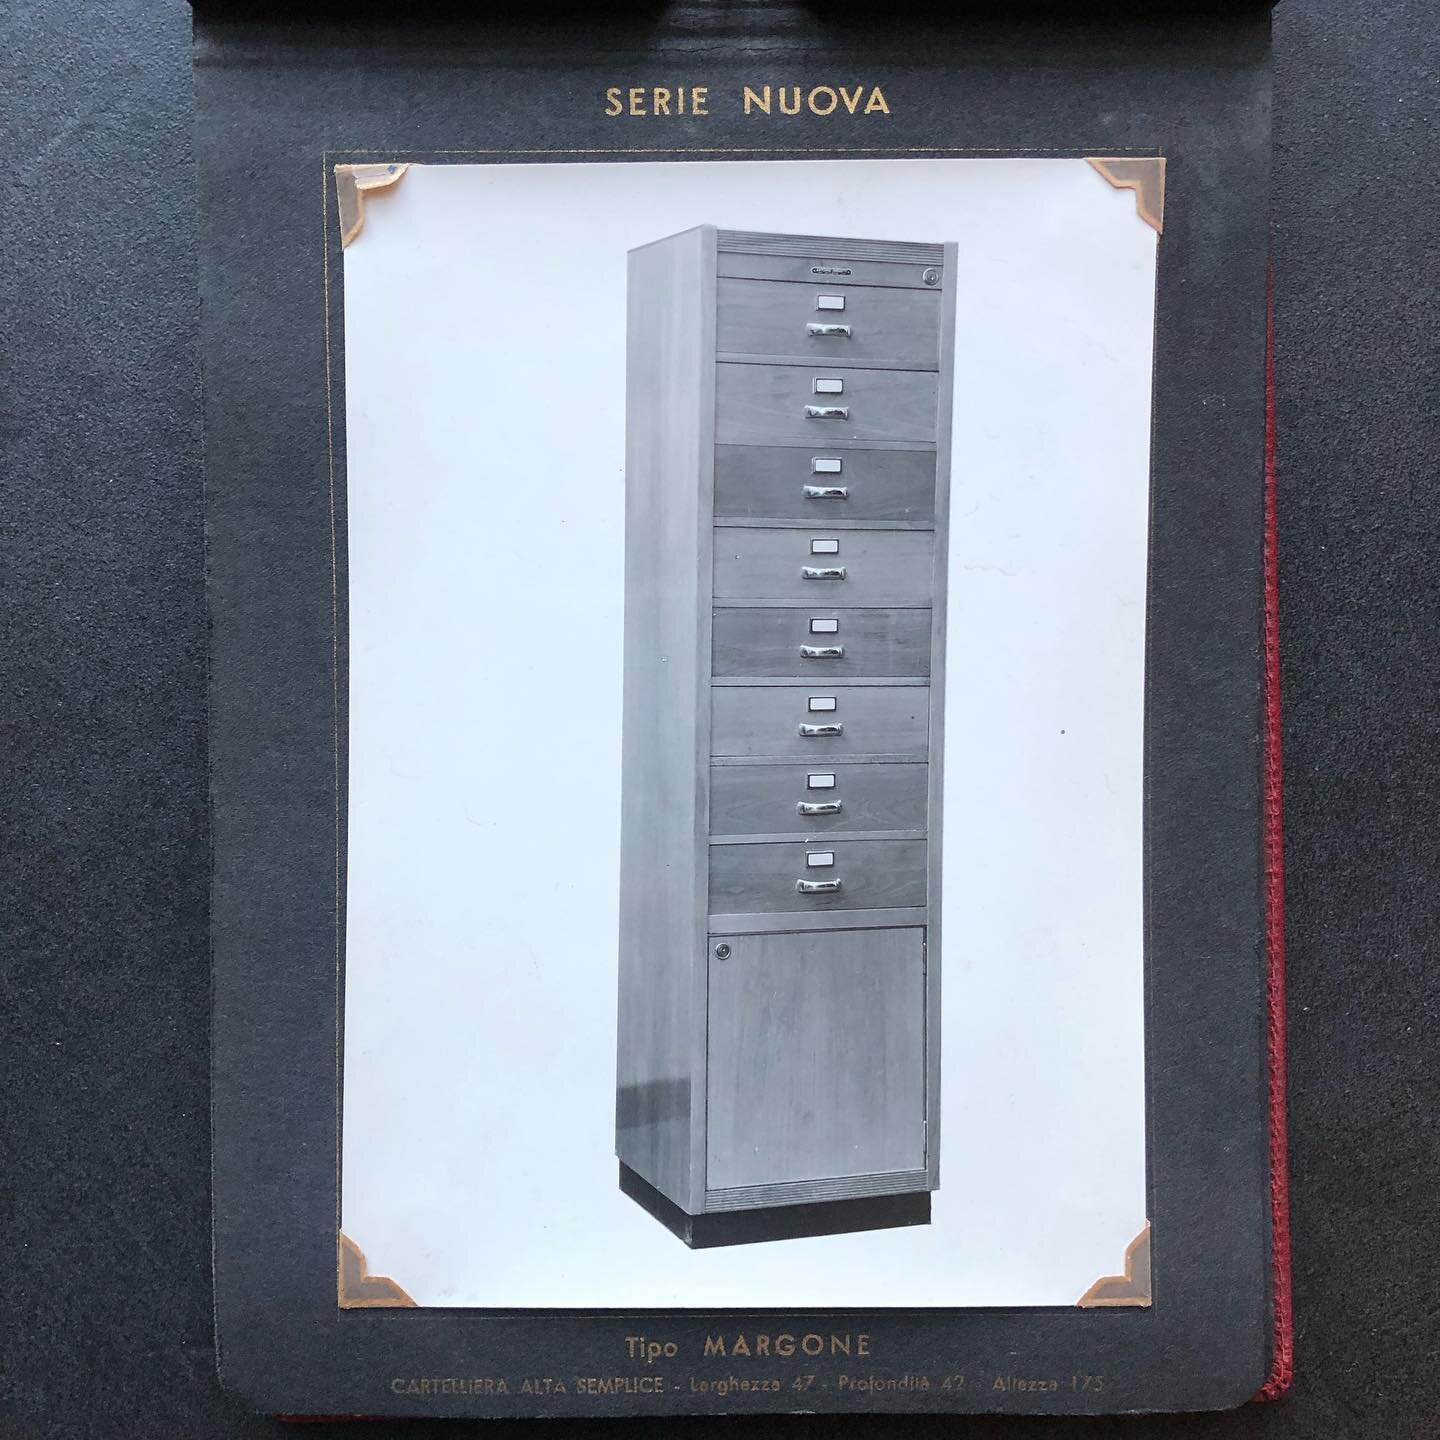 An exciting album with photo prints of cabinets found in Milan this week! #vernacularphotography #usefulphotography #photoalbum